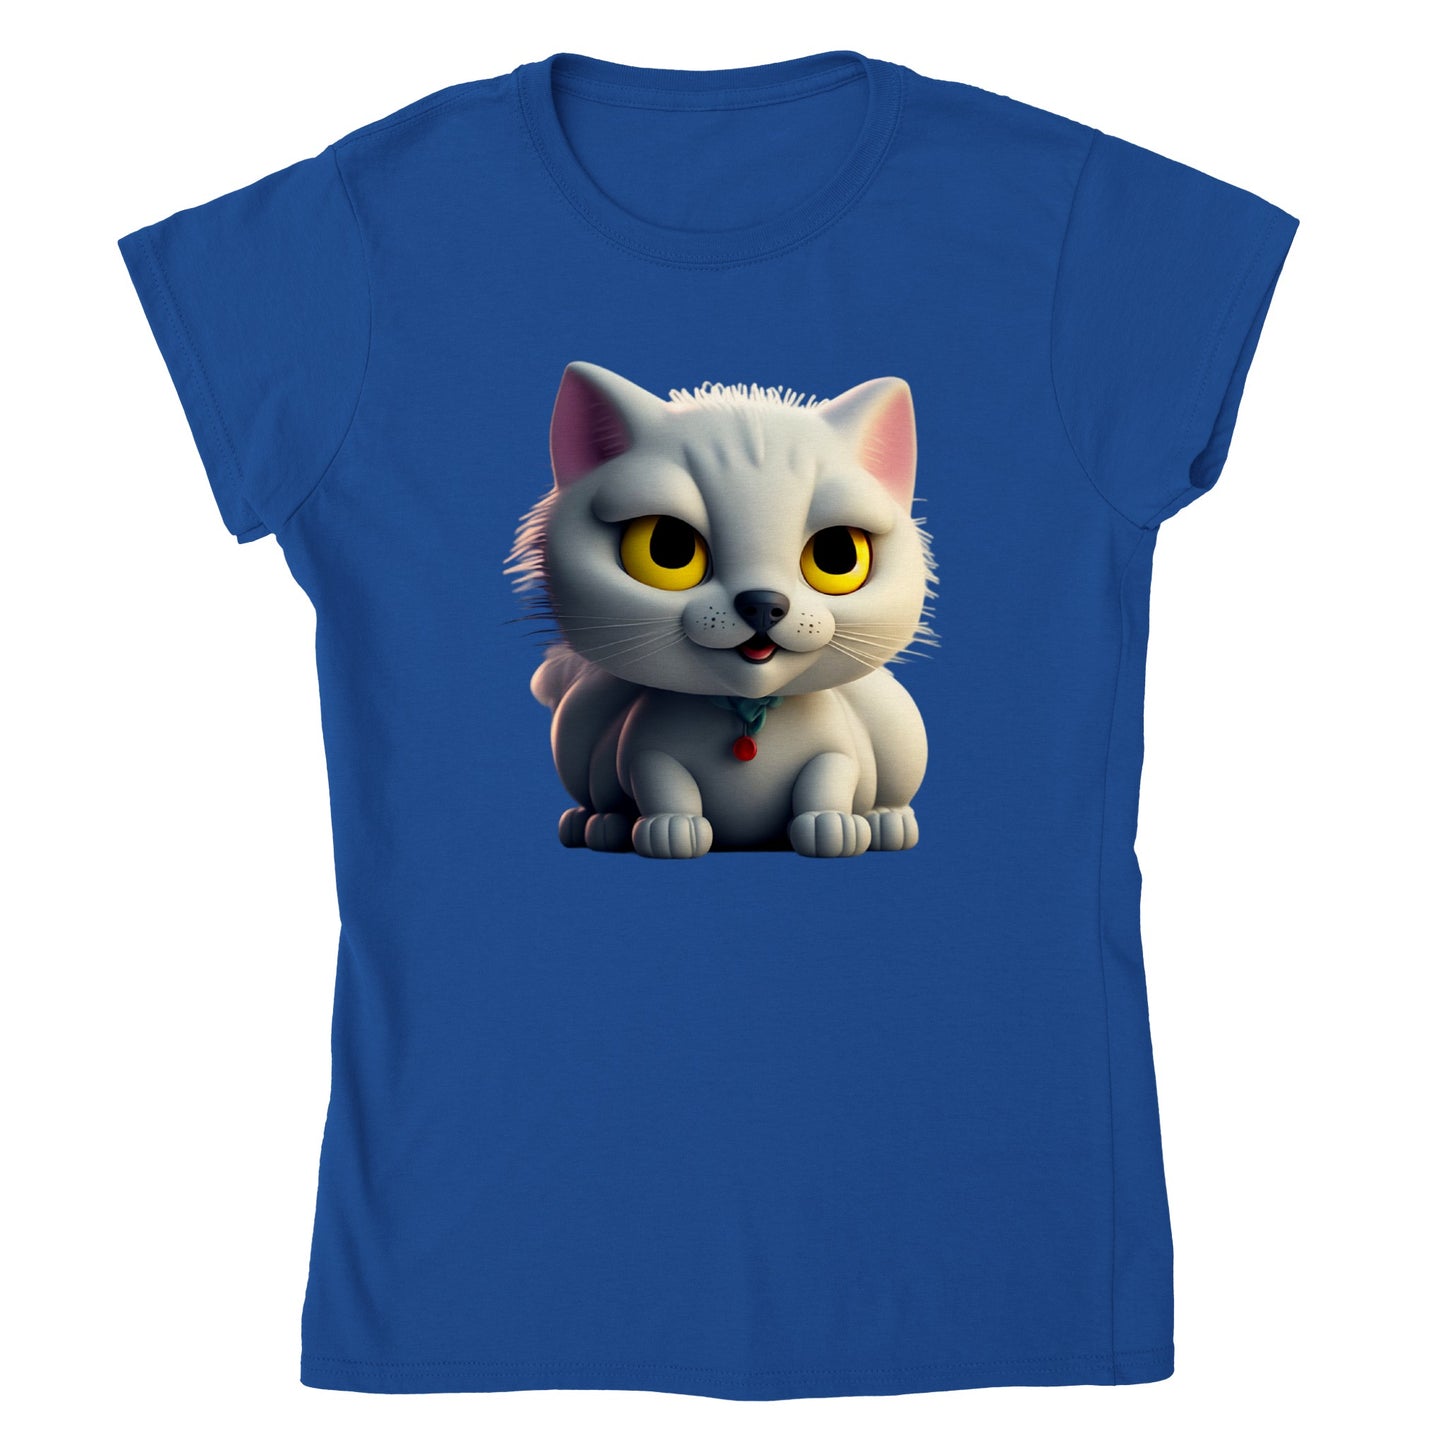 Adorable, Cool, Cute Cats and Kittens Toy - Classic Women’s Crewneck T-Shirt 52